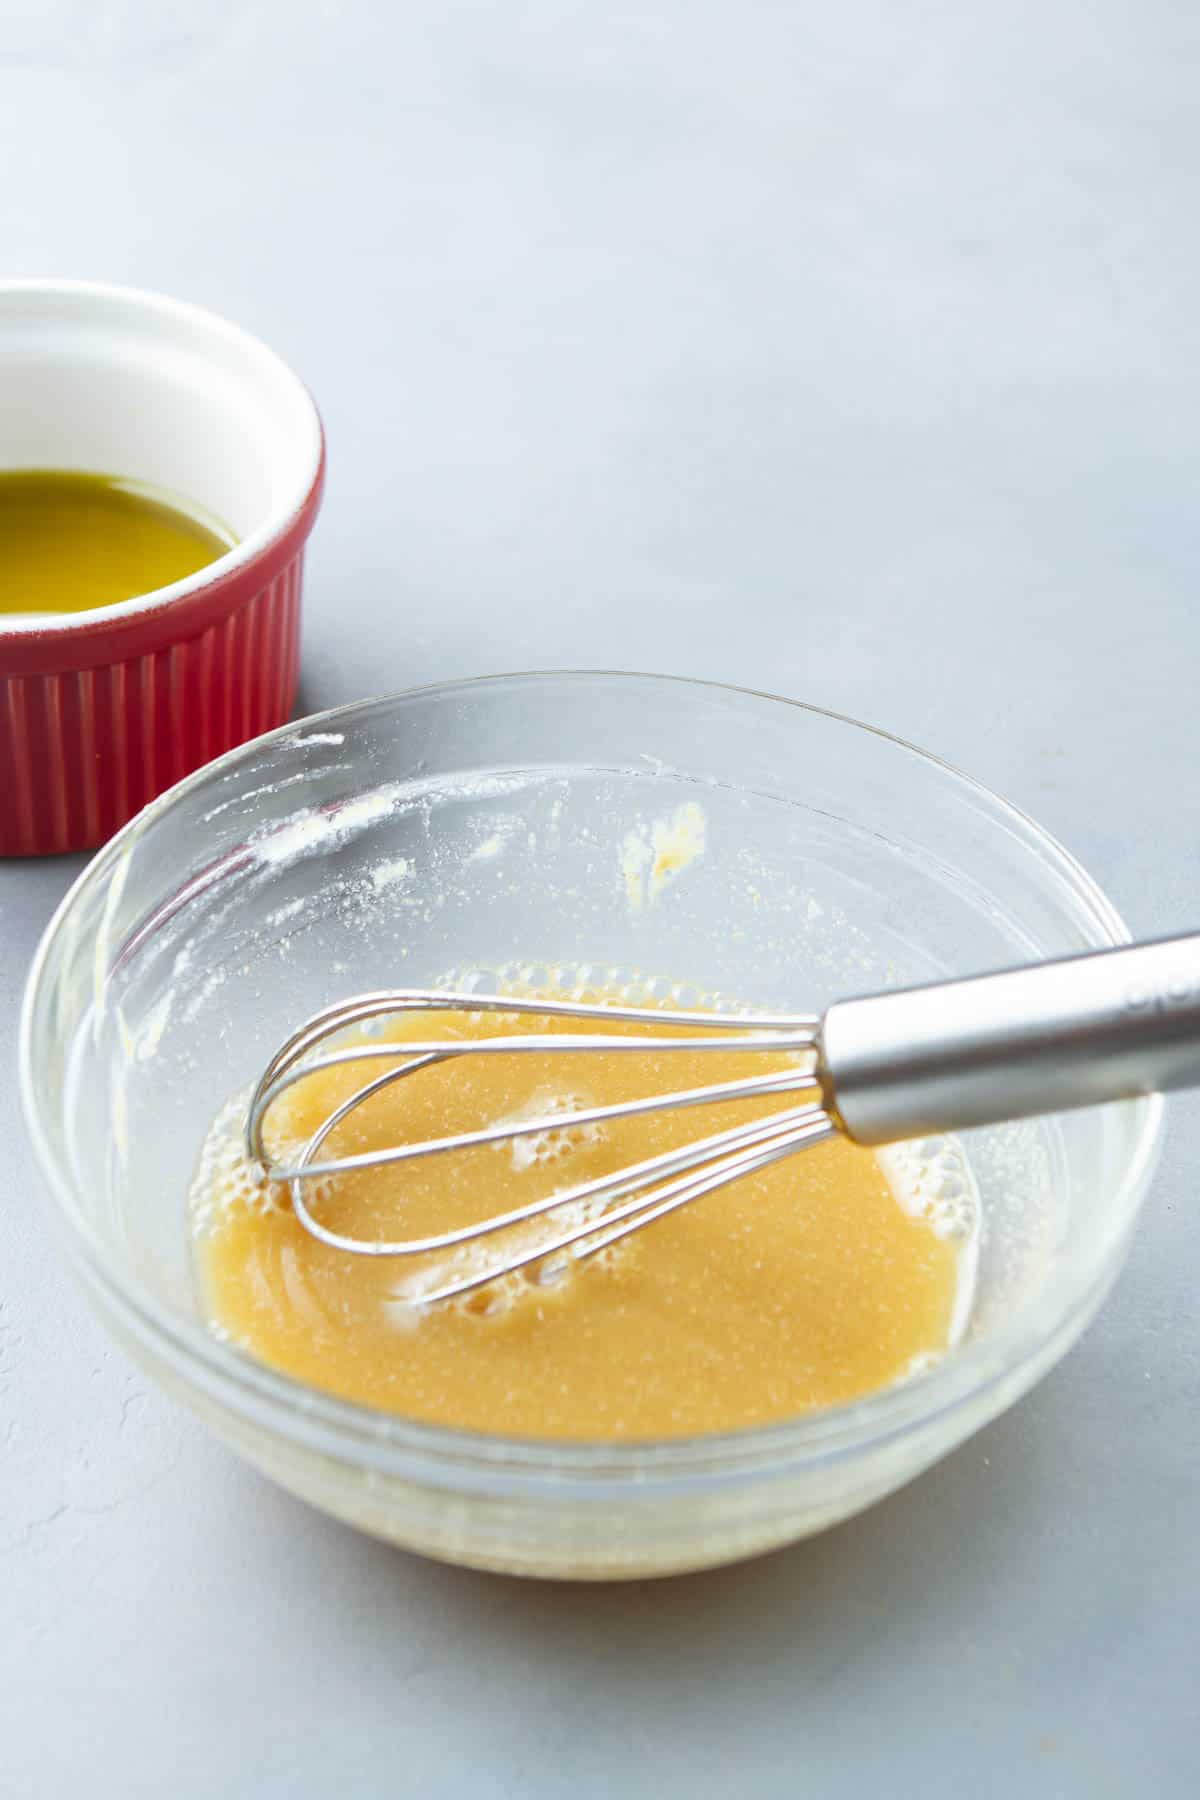 Salad dressing and a whisk in a small glass bowl.